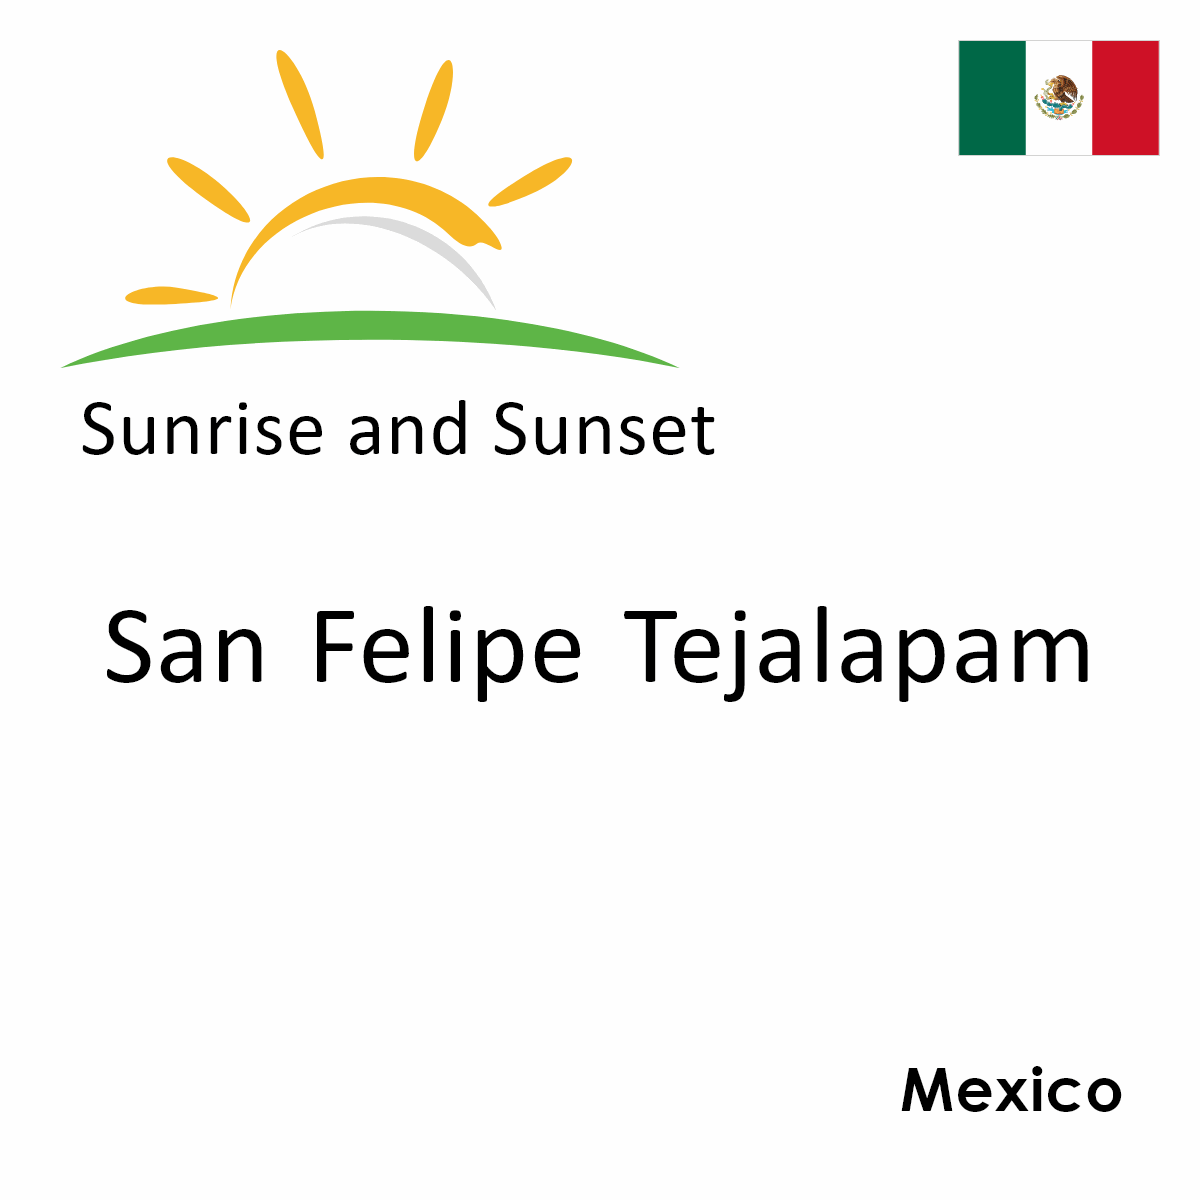 Sunrise and Sunset Times in San Felipe Tejalapam, Mexico